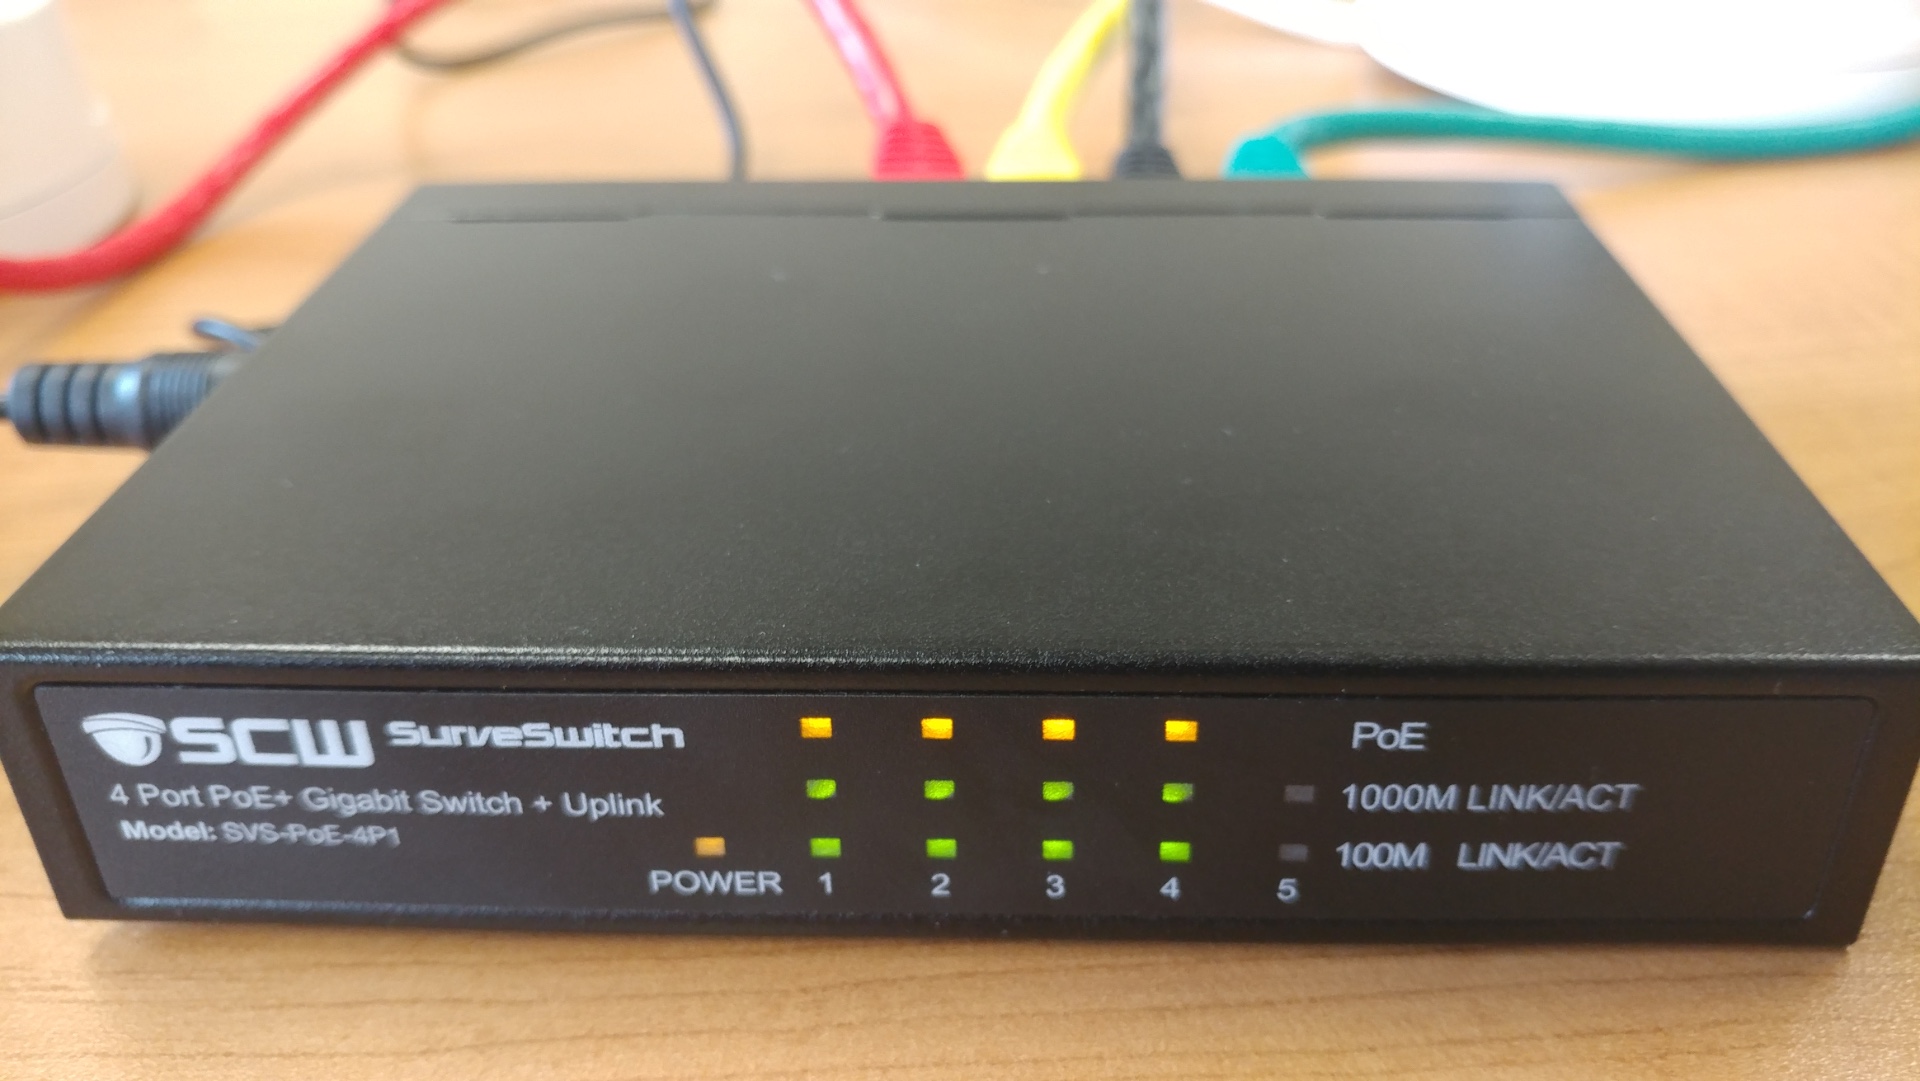 5 Port POE Switch - System for IP Cameras